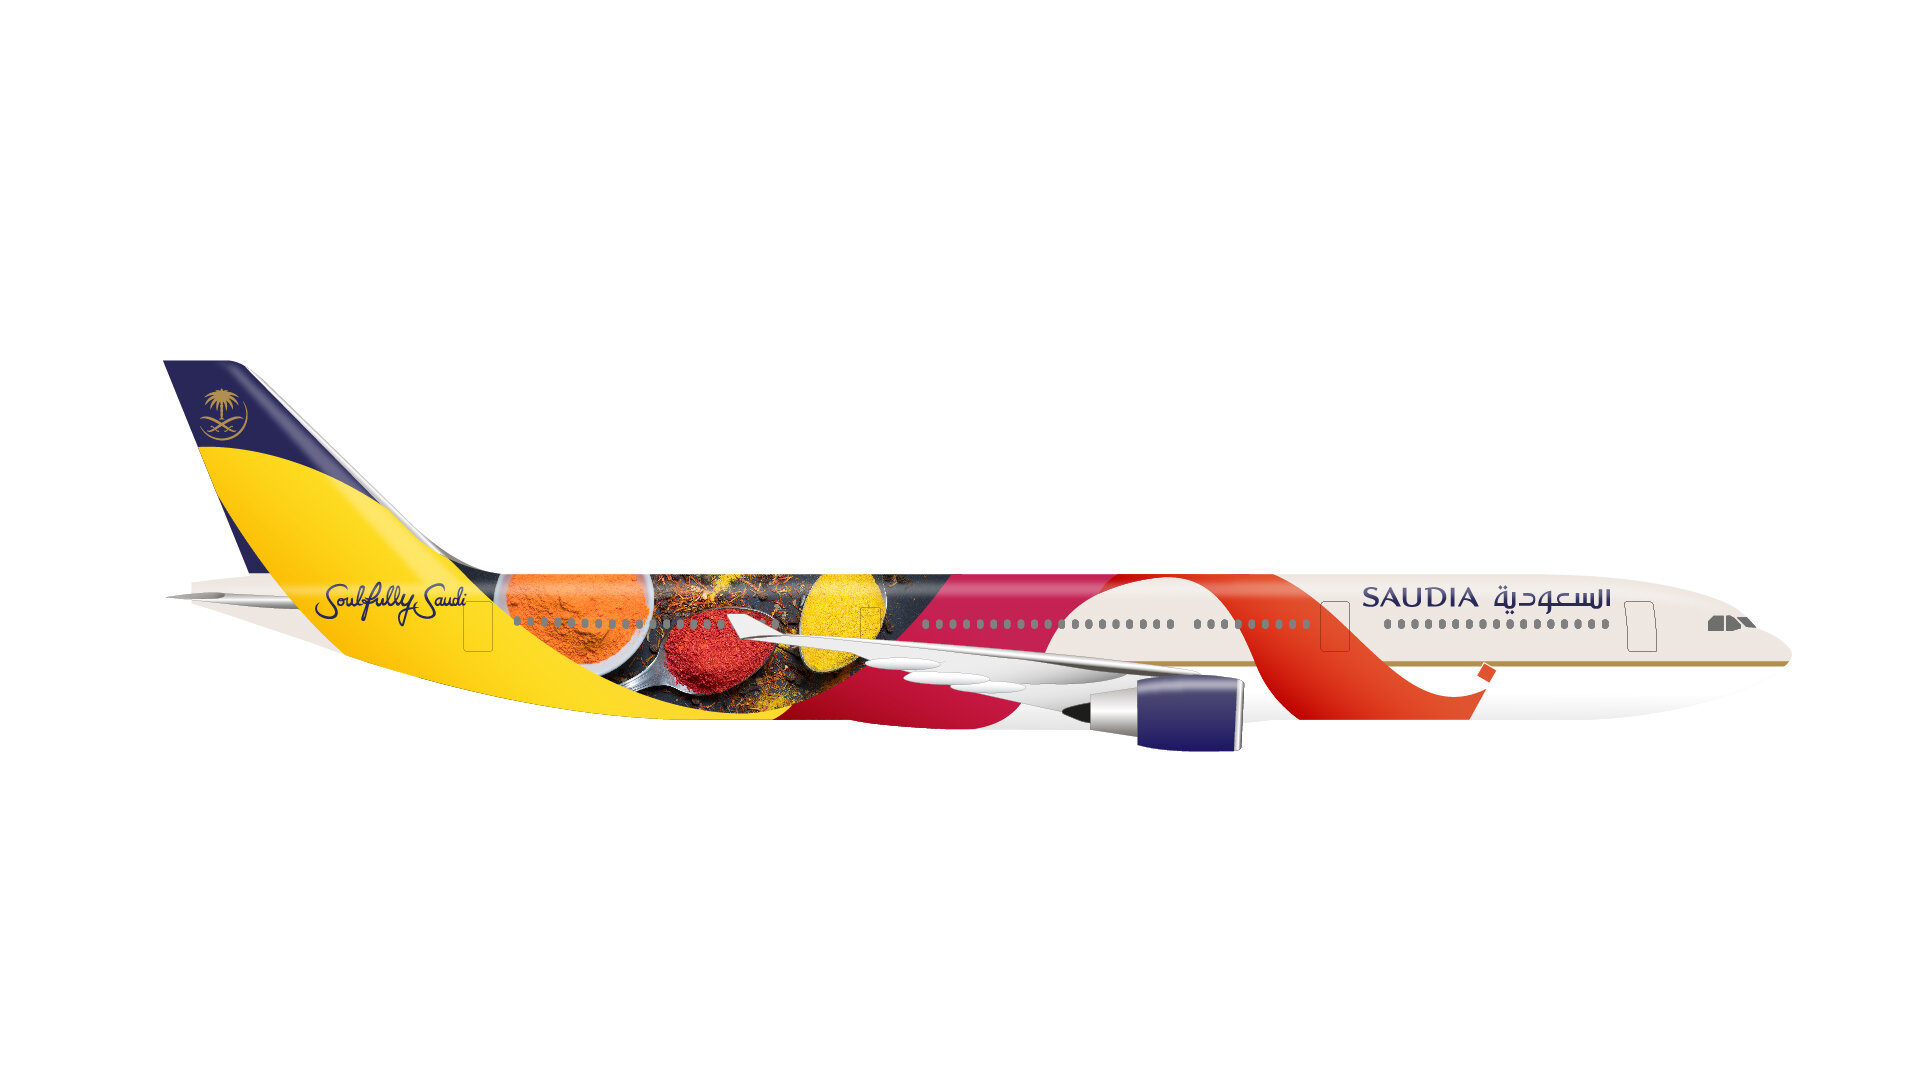 SAUDIA_Route 1_Exploration_Livery - 4_Plane RIGHT SIDE 1.jpg